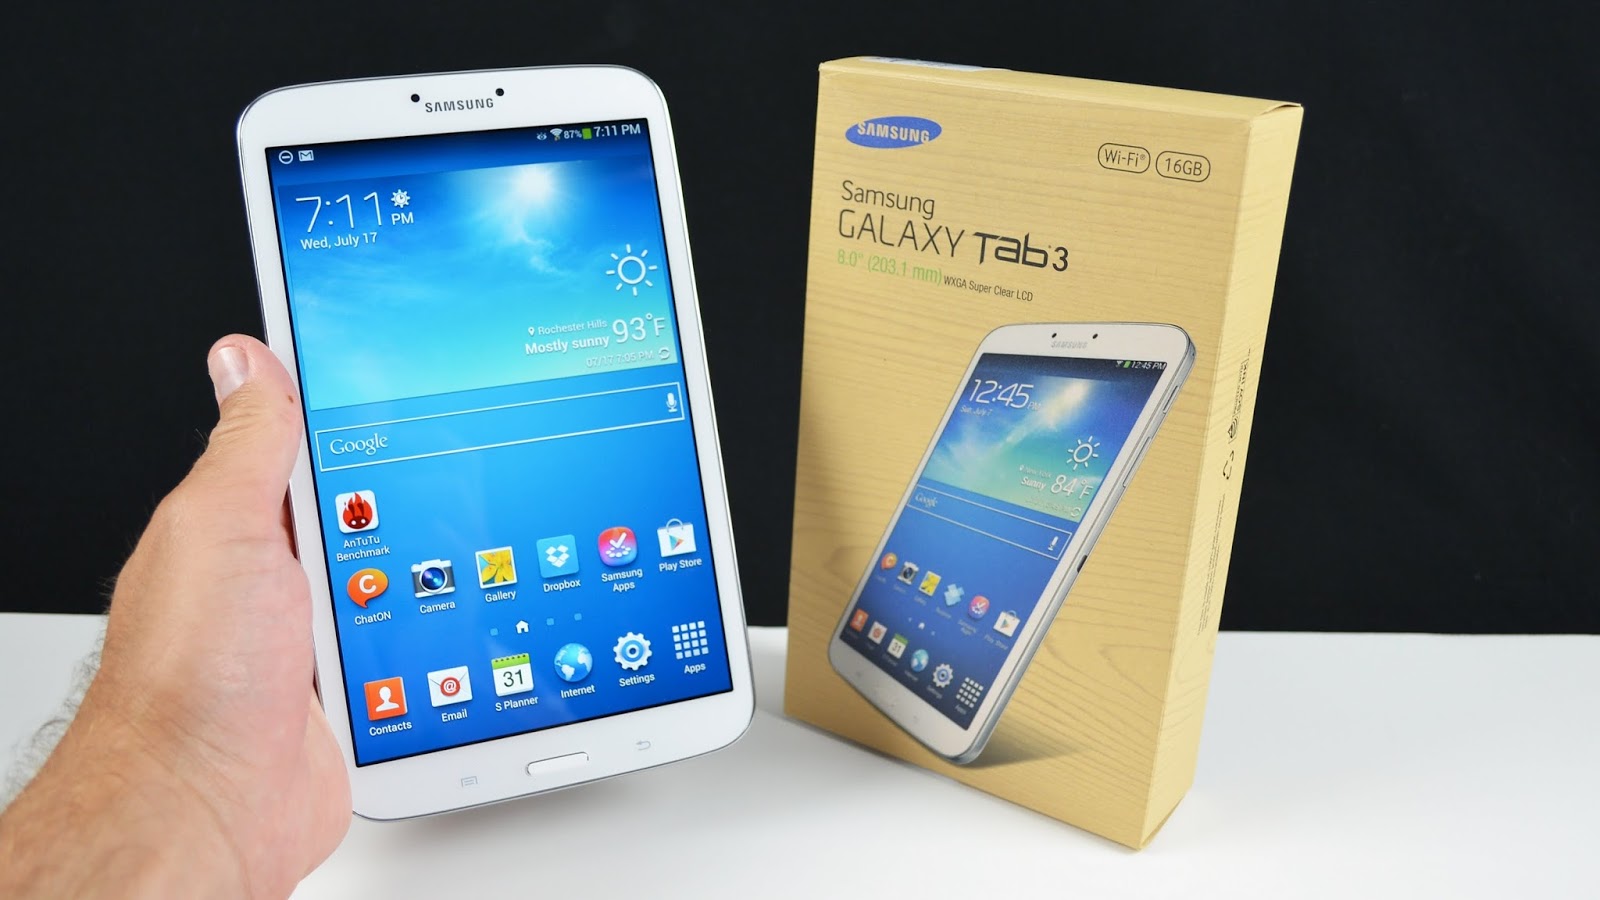 Samsung Galaxy Tab E affordable 9.6-inch tablet - Playstore Market